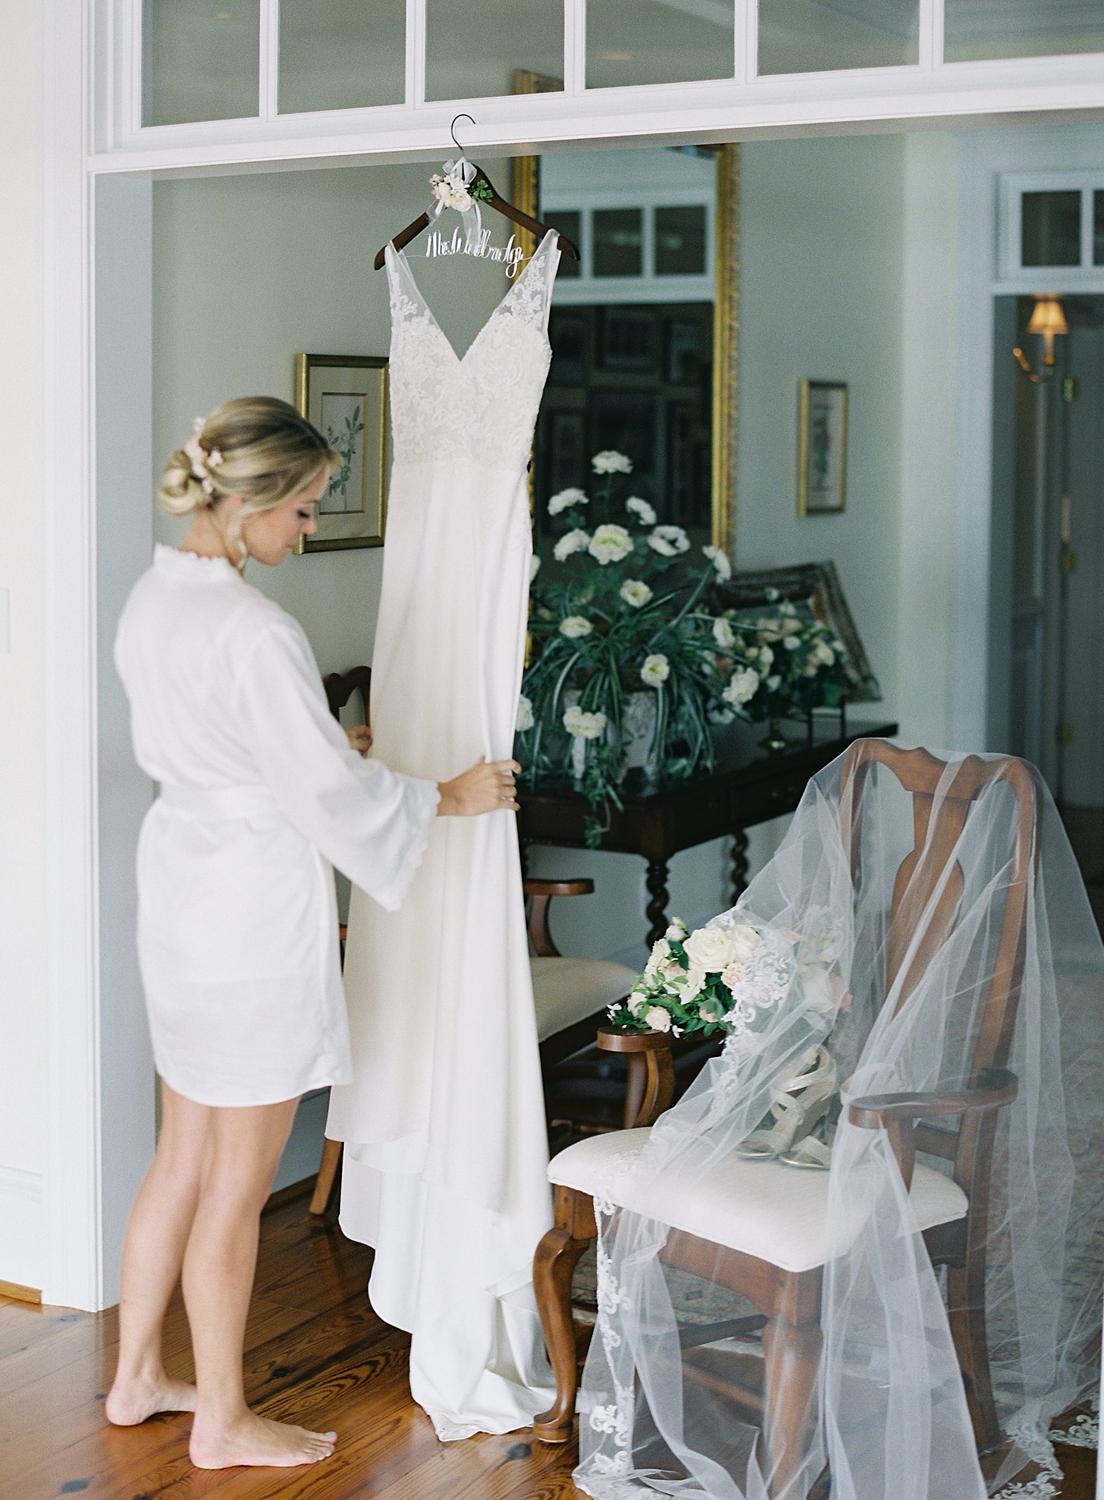 Bride hanging up her wedding gown before her ceremony